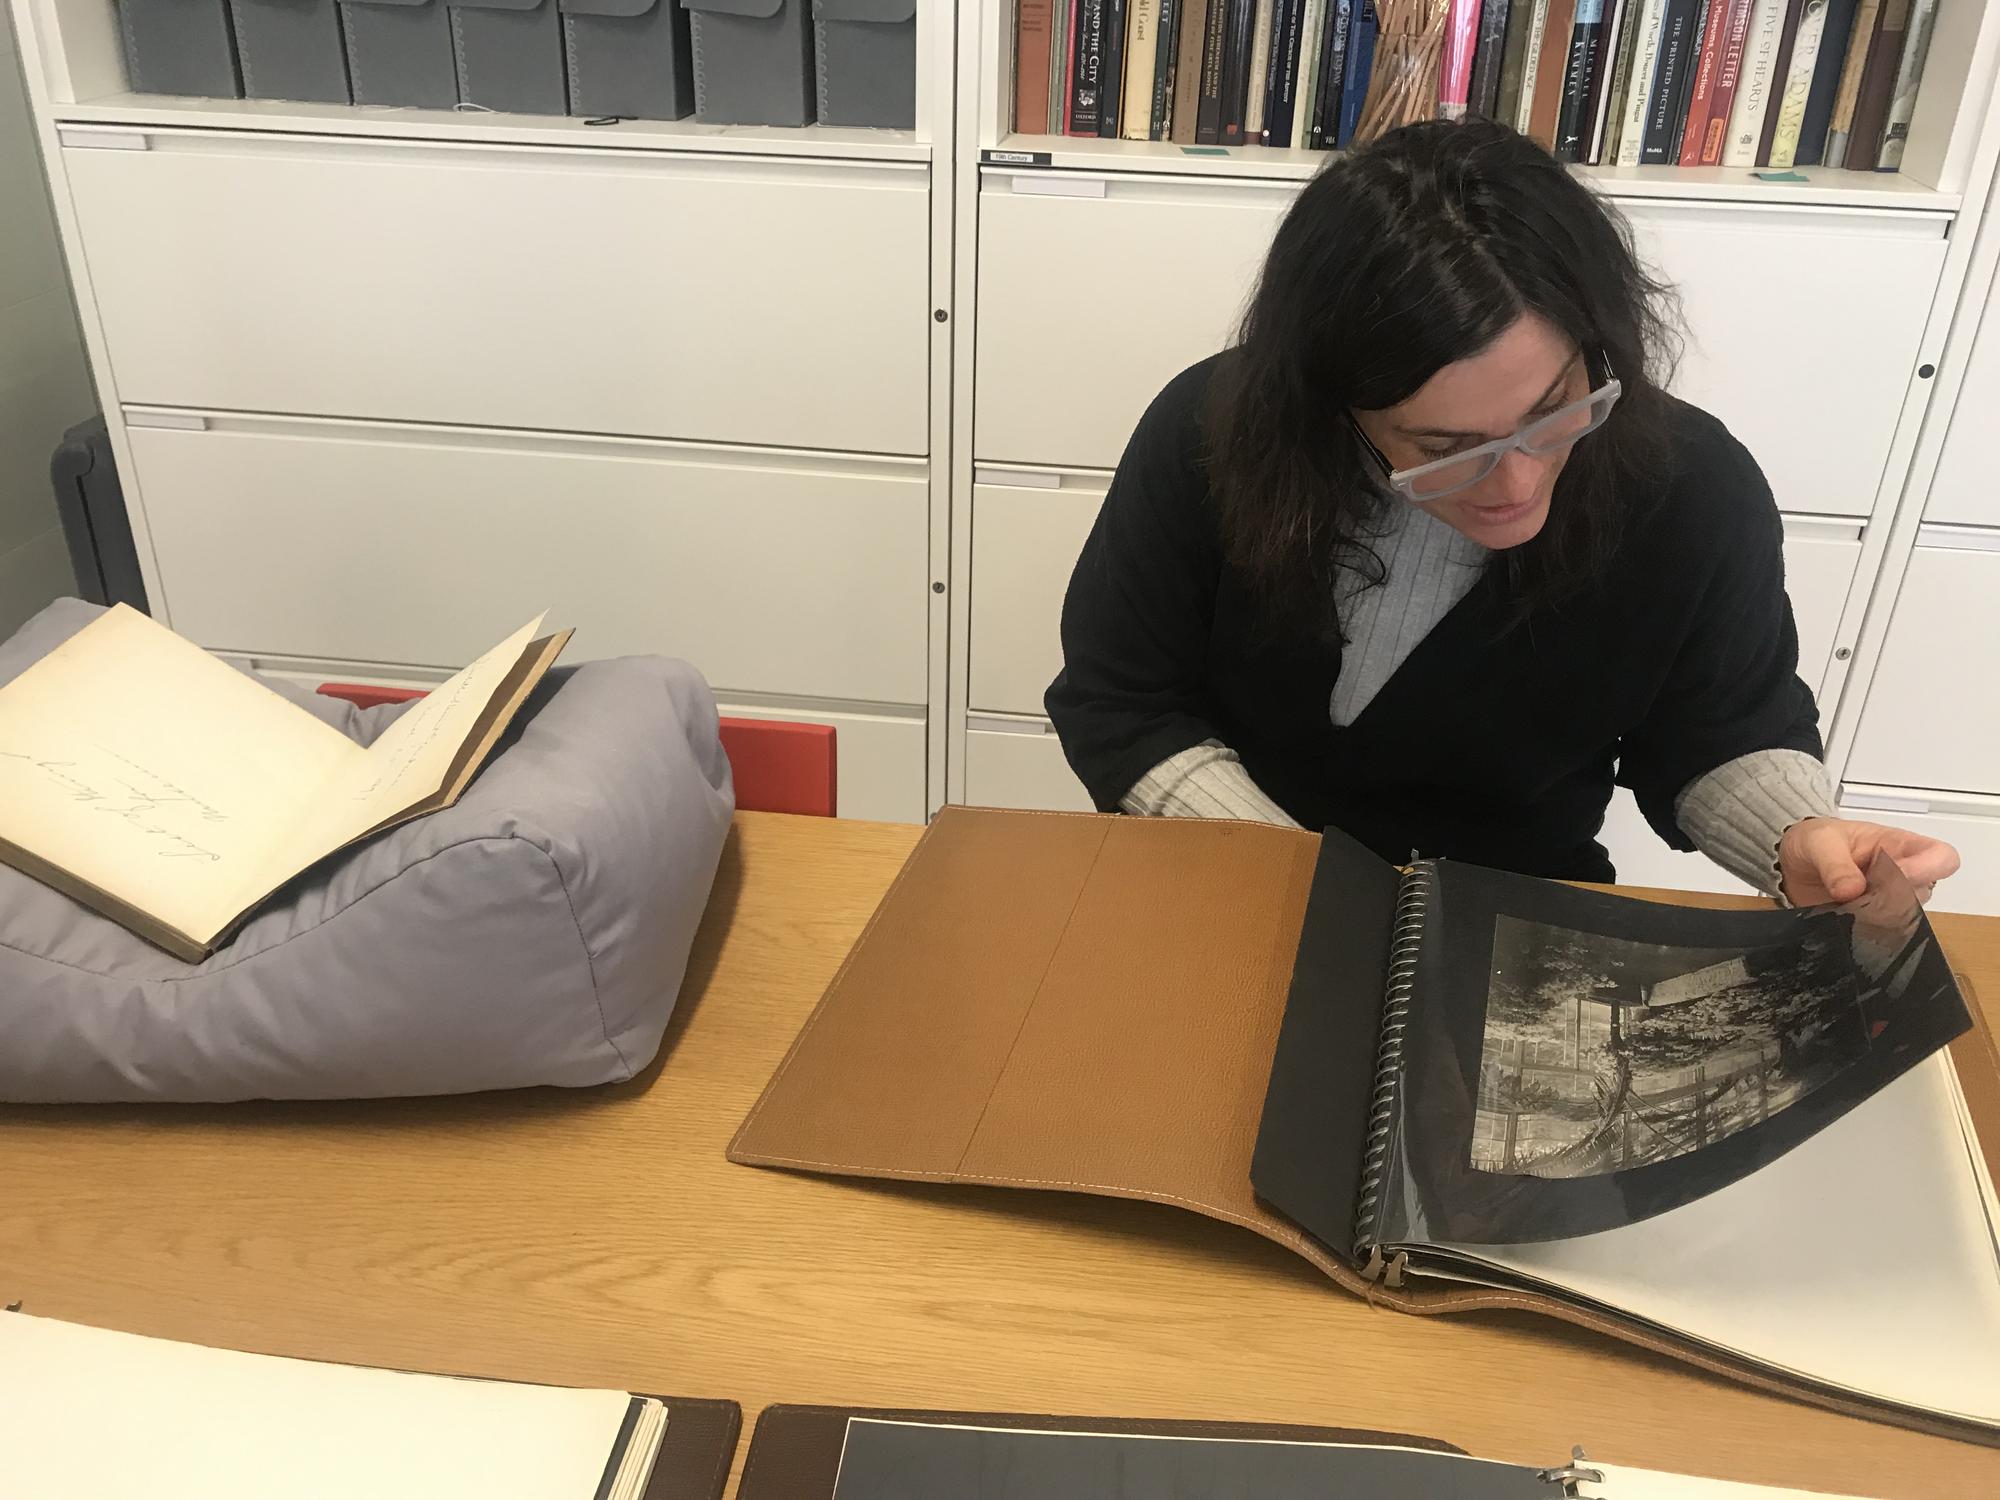 Nicole Cherubini looking at Gardner’s photo album of Green Hill taken by Thomas Marr and Son, 2019